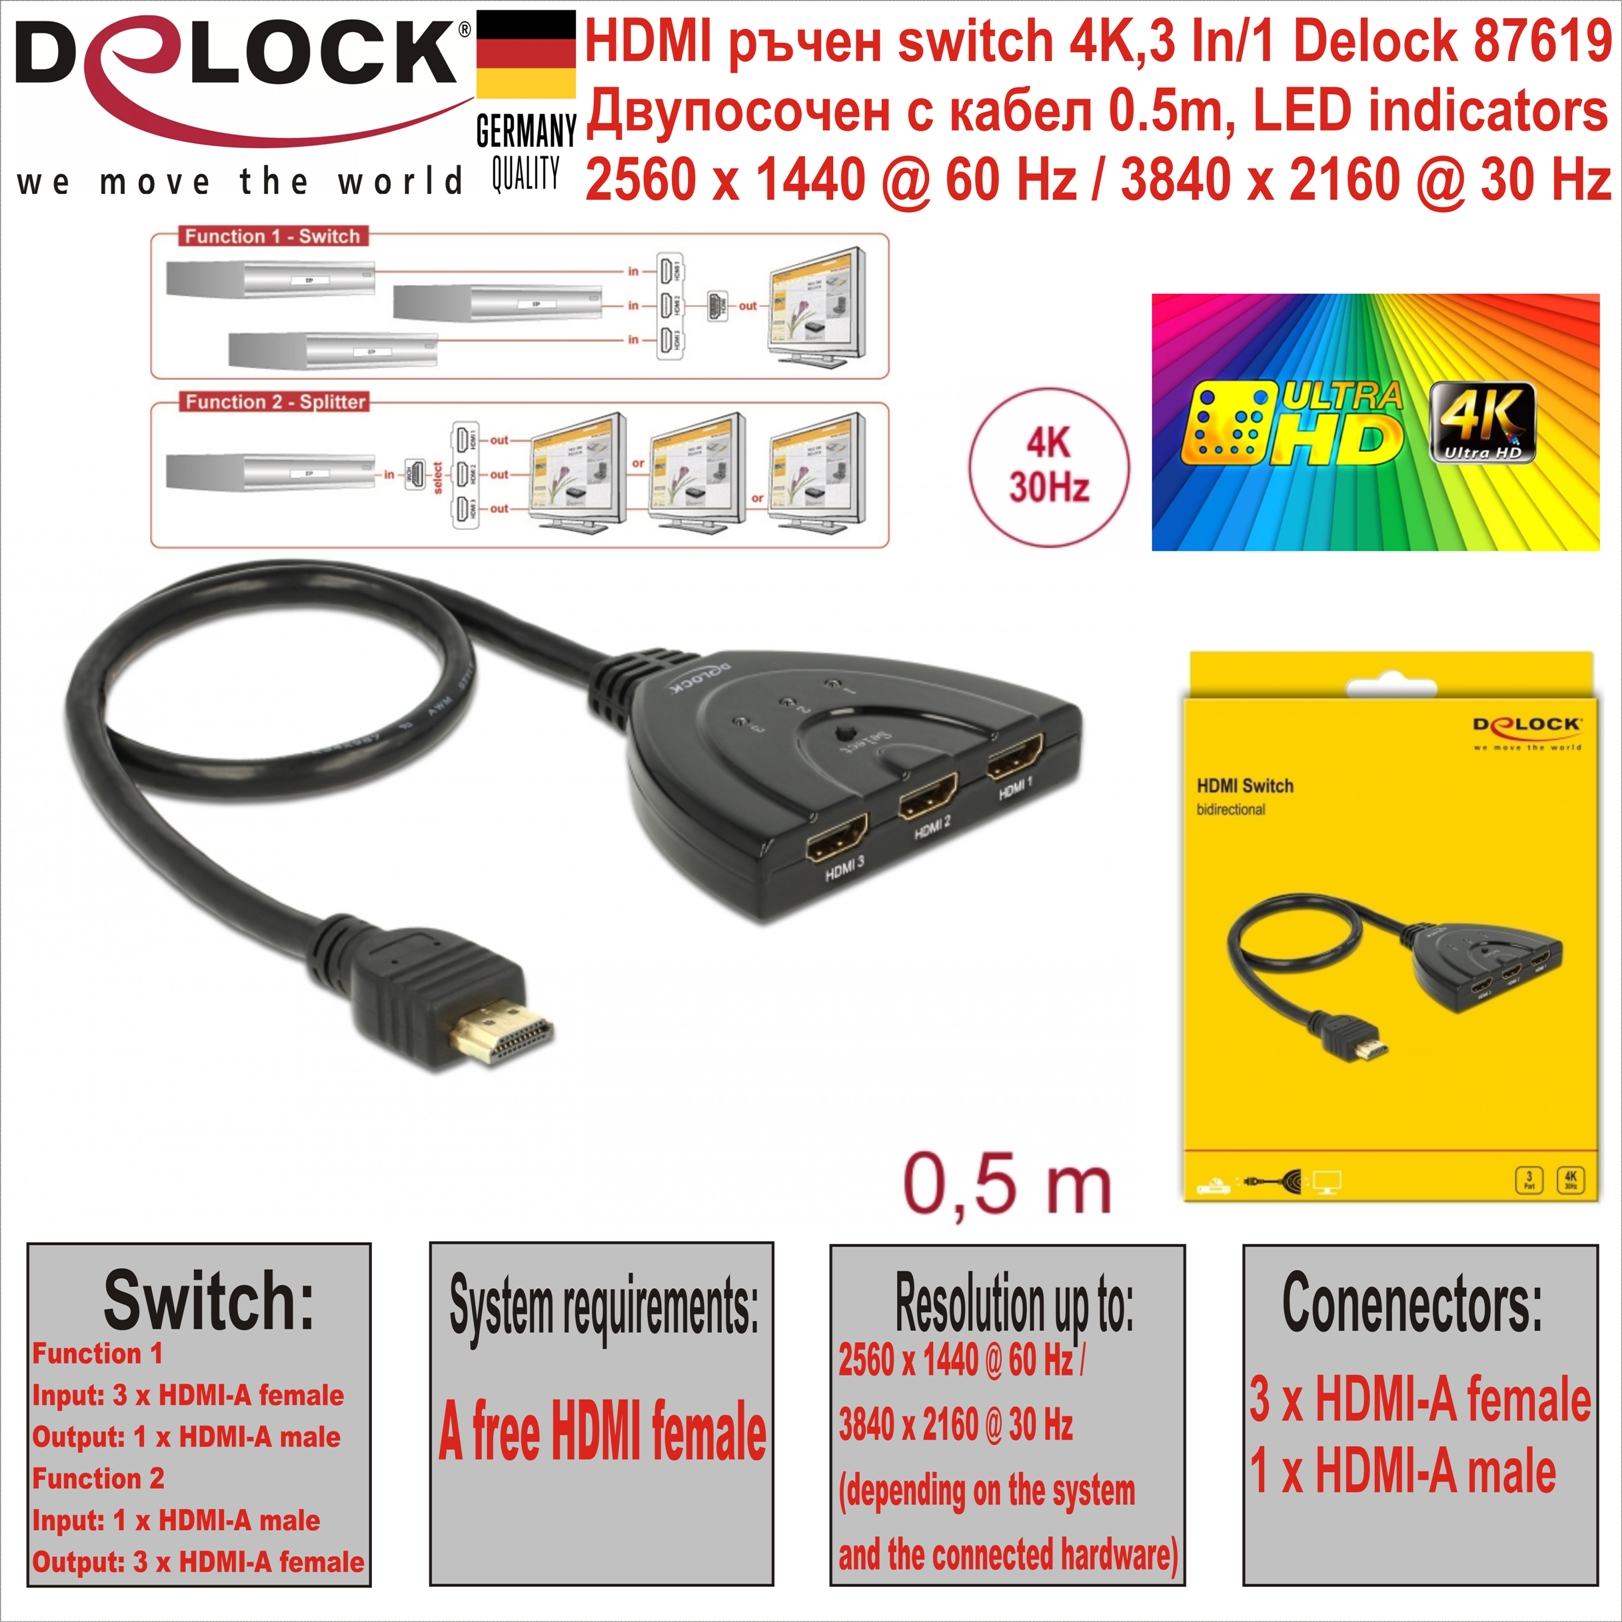 HDMI ръчен switch 4K,3 In/1 Delock 87619 Двупос.